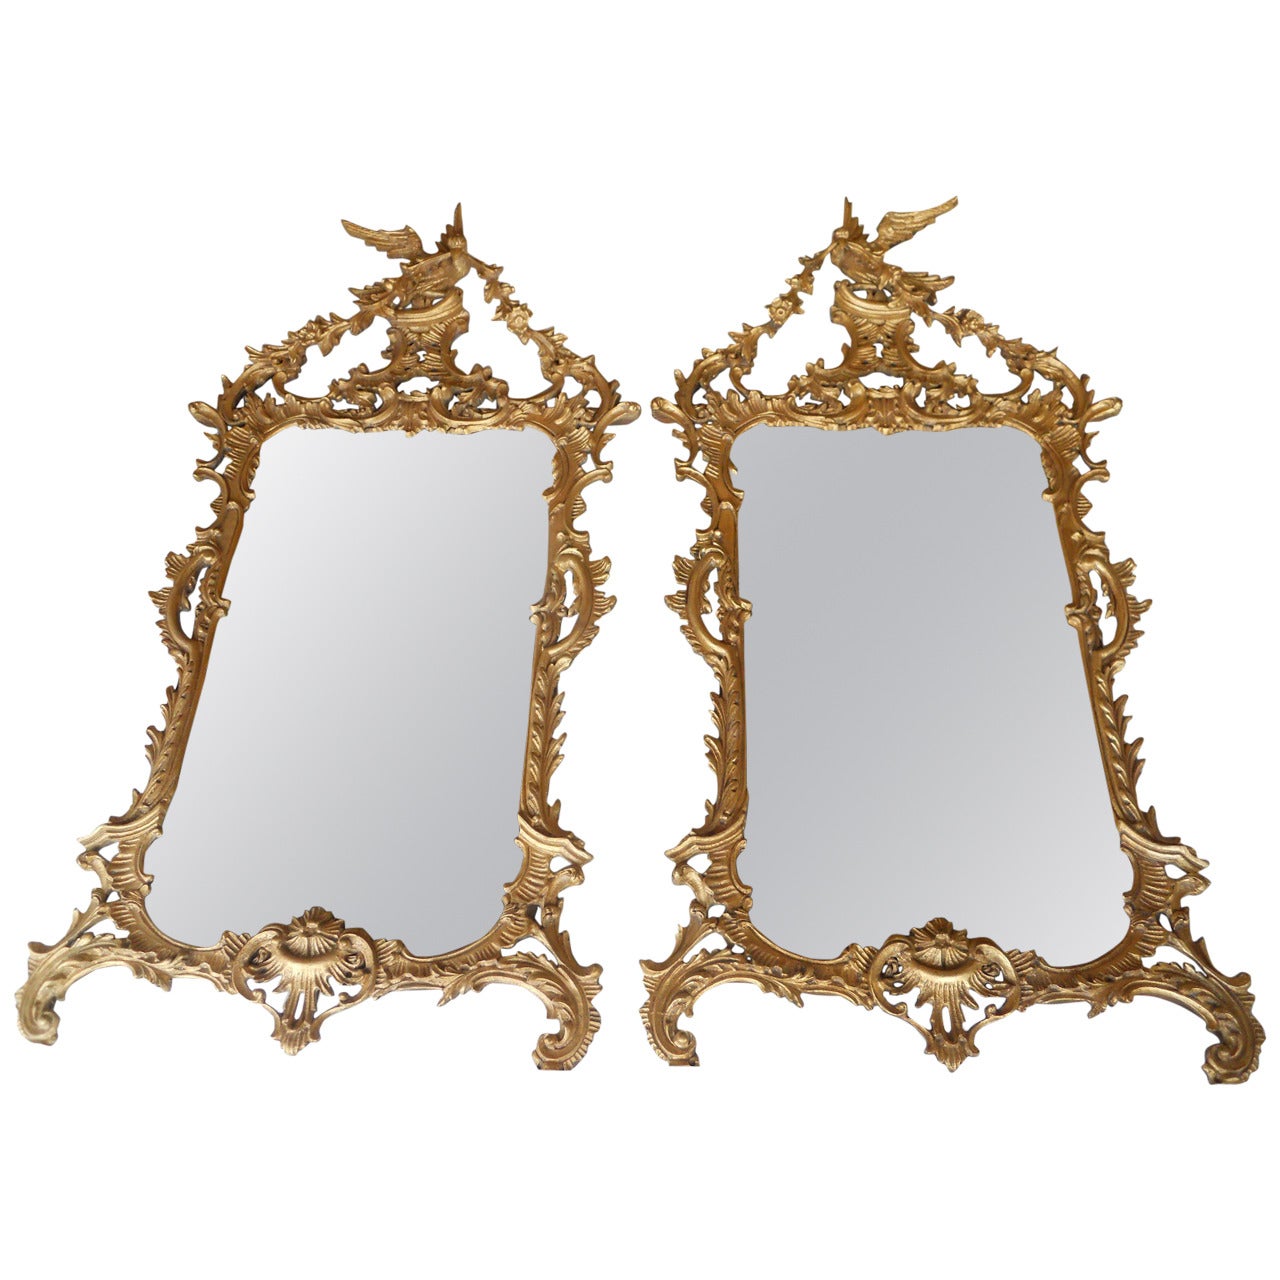 Extraordinary Pair of Chippendale Style Mirrors